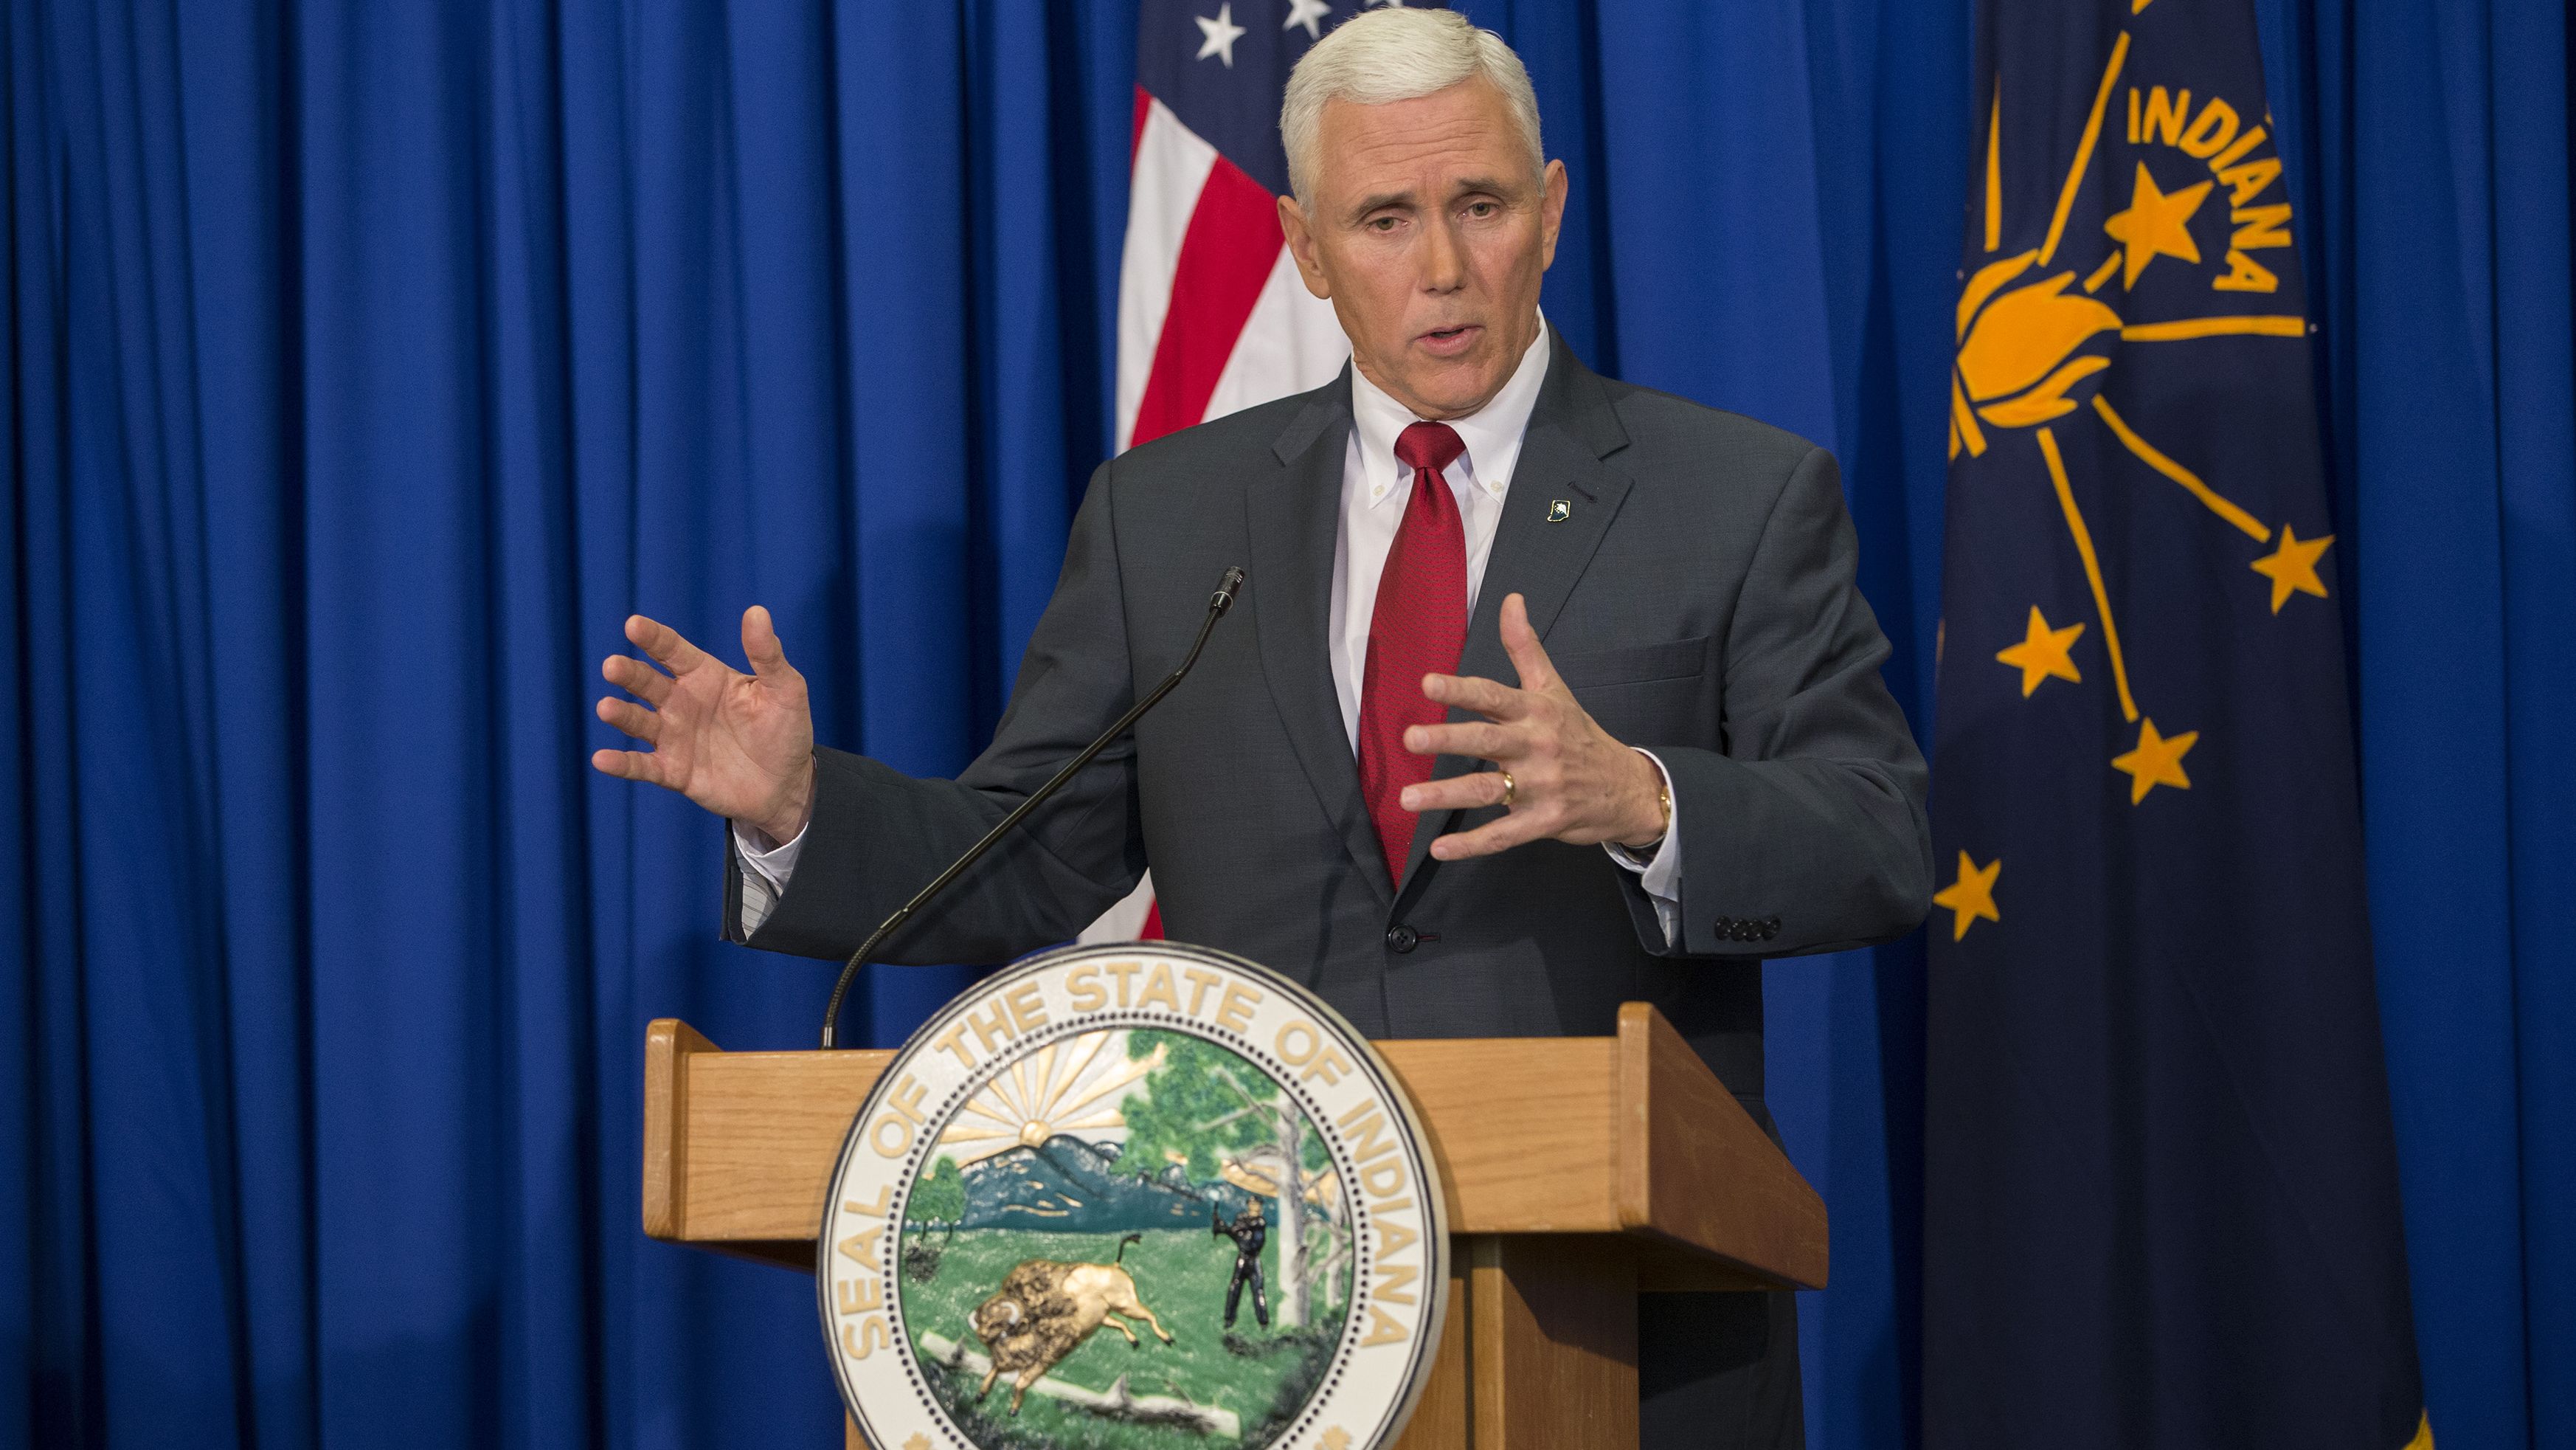 Gov. Pence speaks at a press conference on March 31, 2015 at the Indiana State Library in Indianapolis.